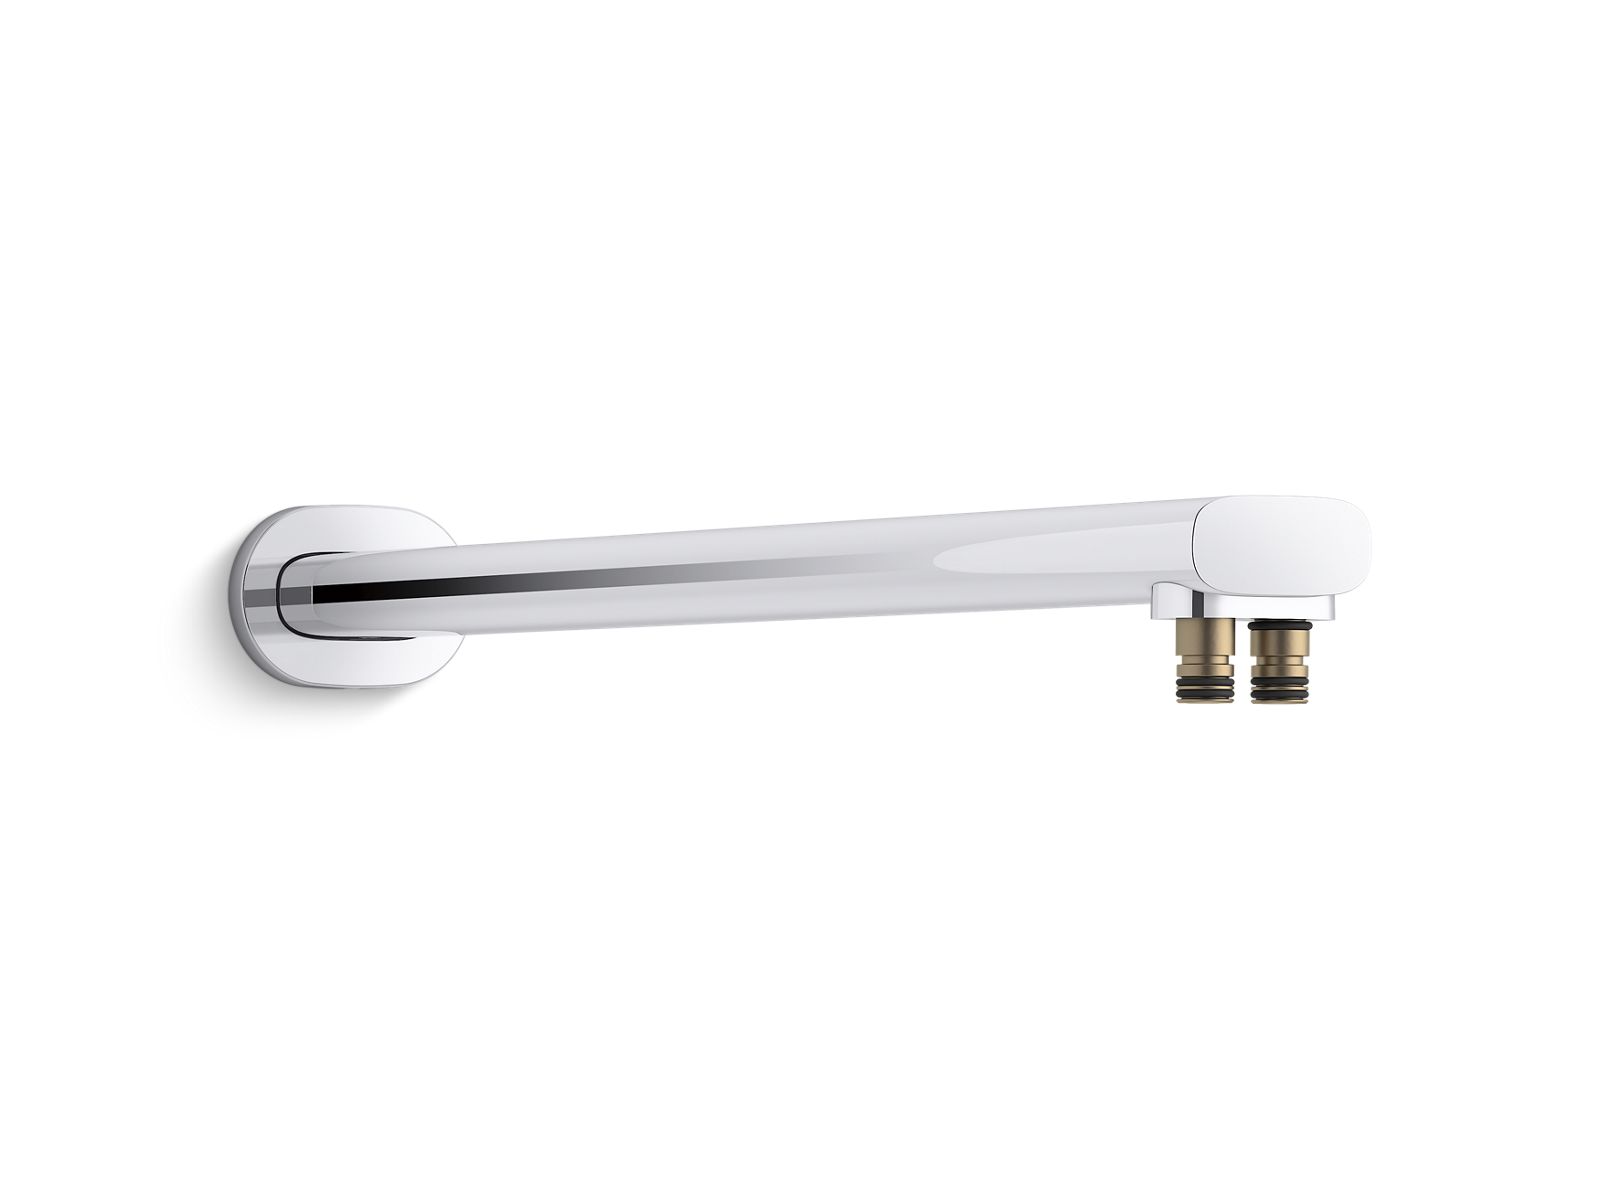 Statement™ 483 mm wall-mount two-function rainhead arm and flange 